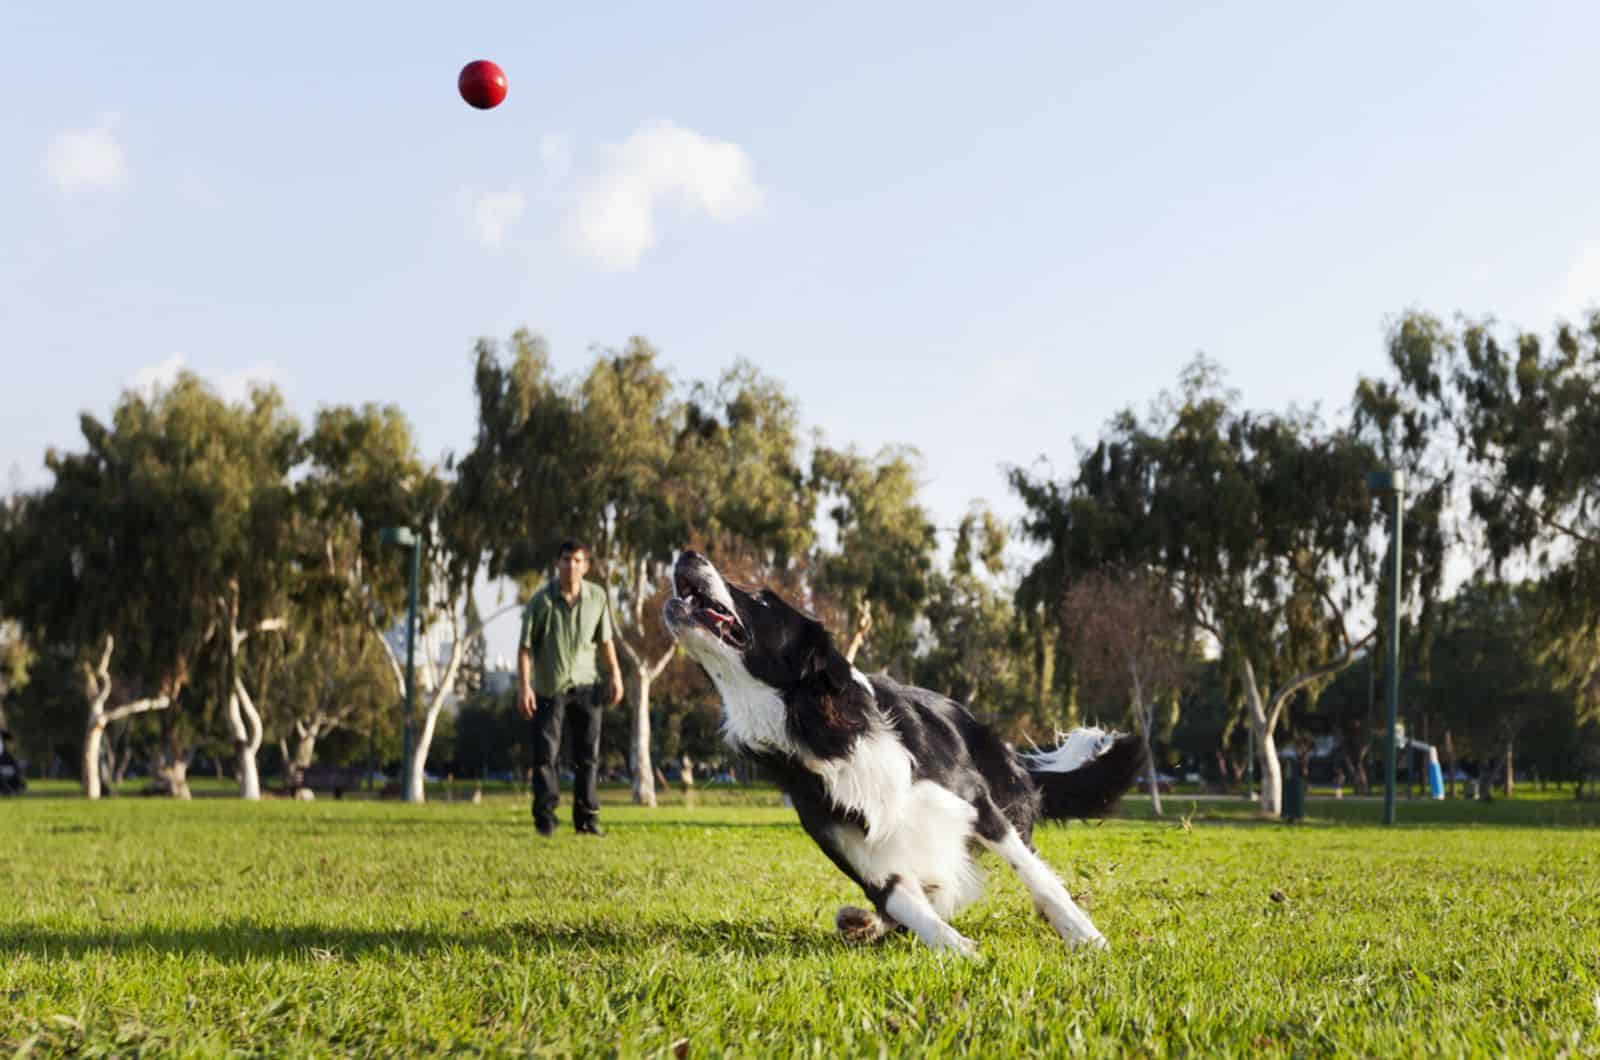 dog catching a ball while his owner looking at him